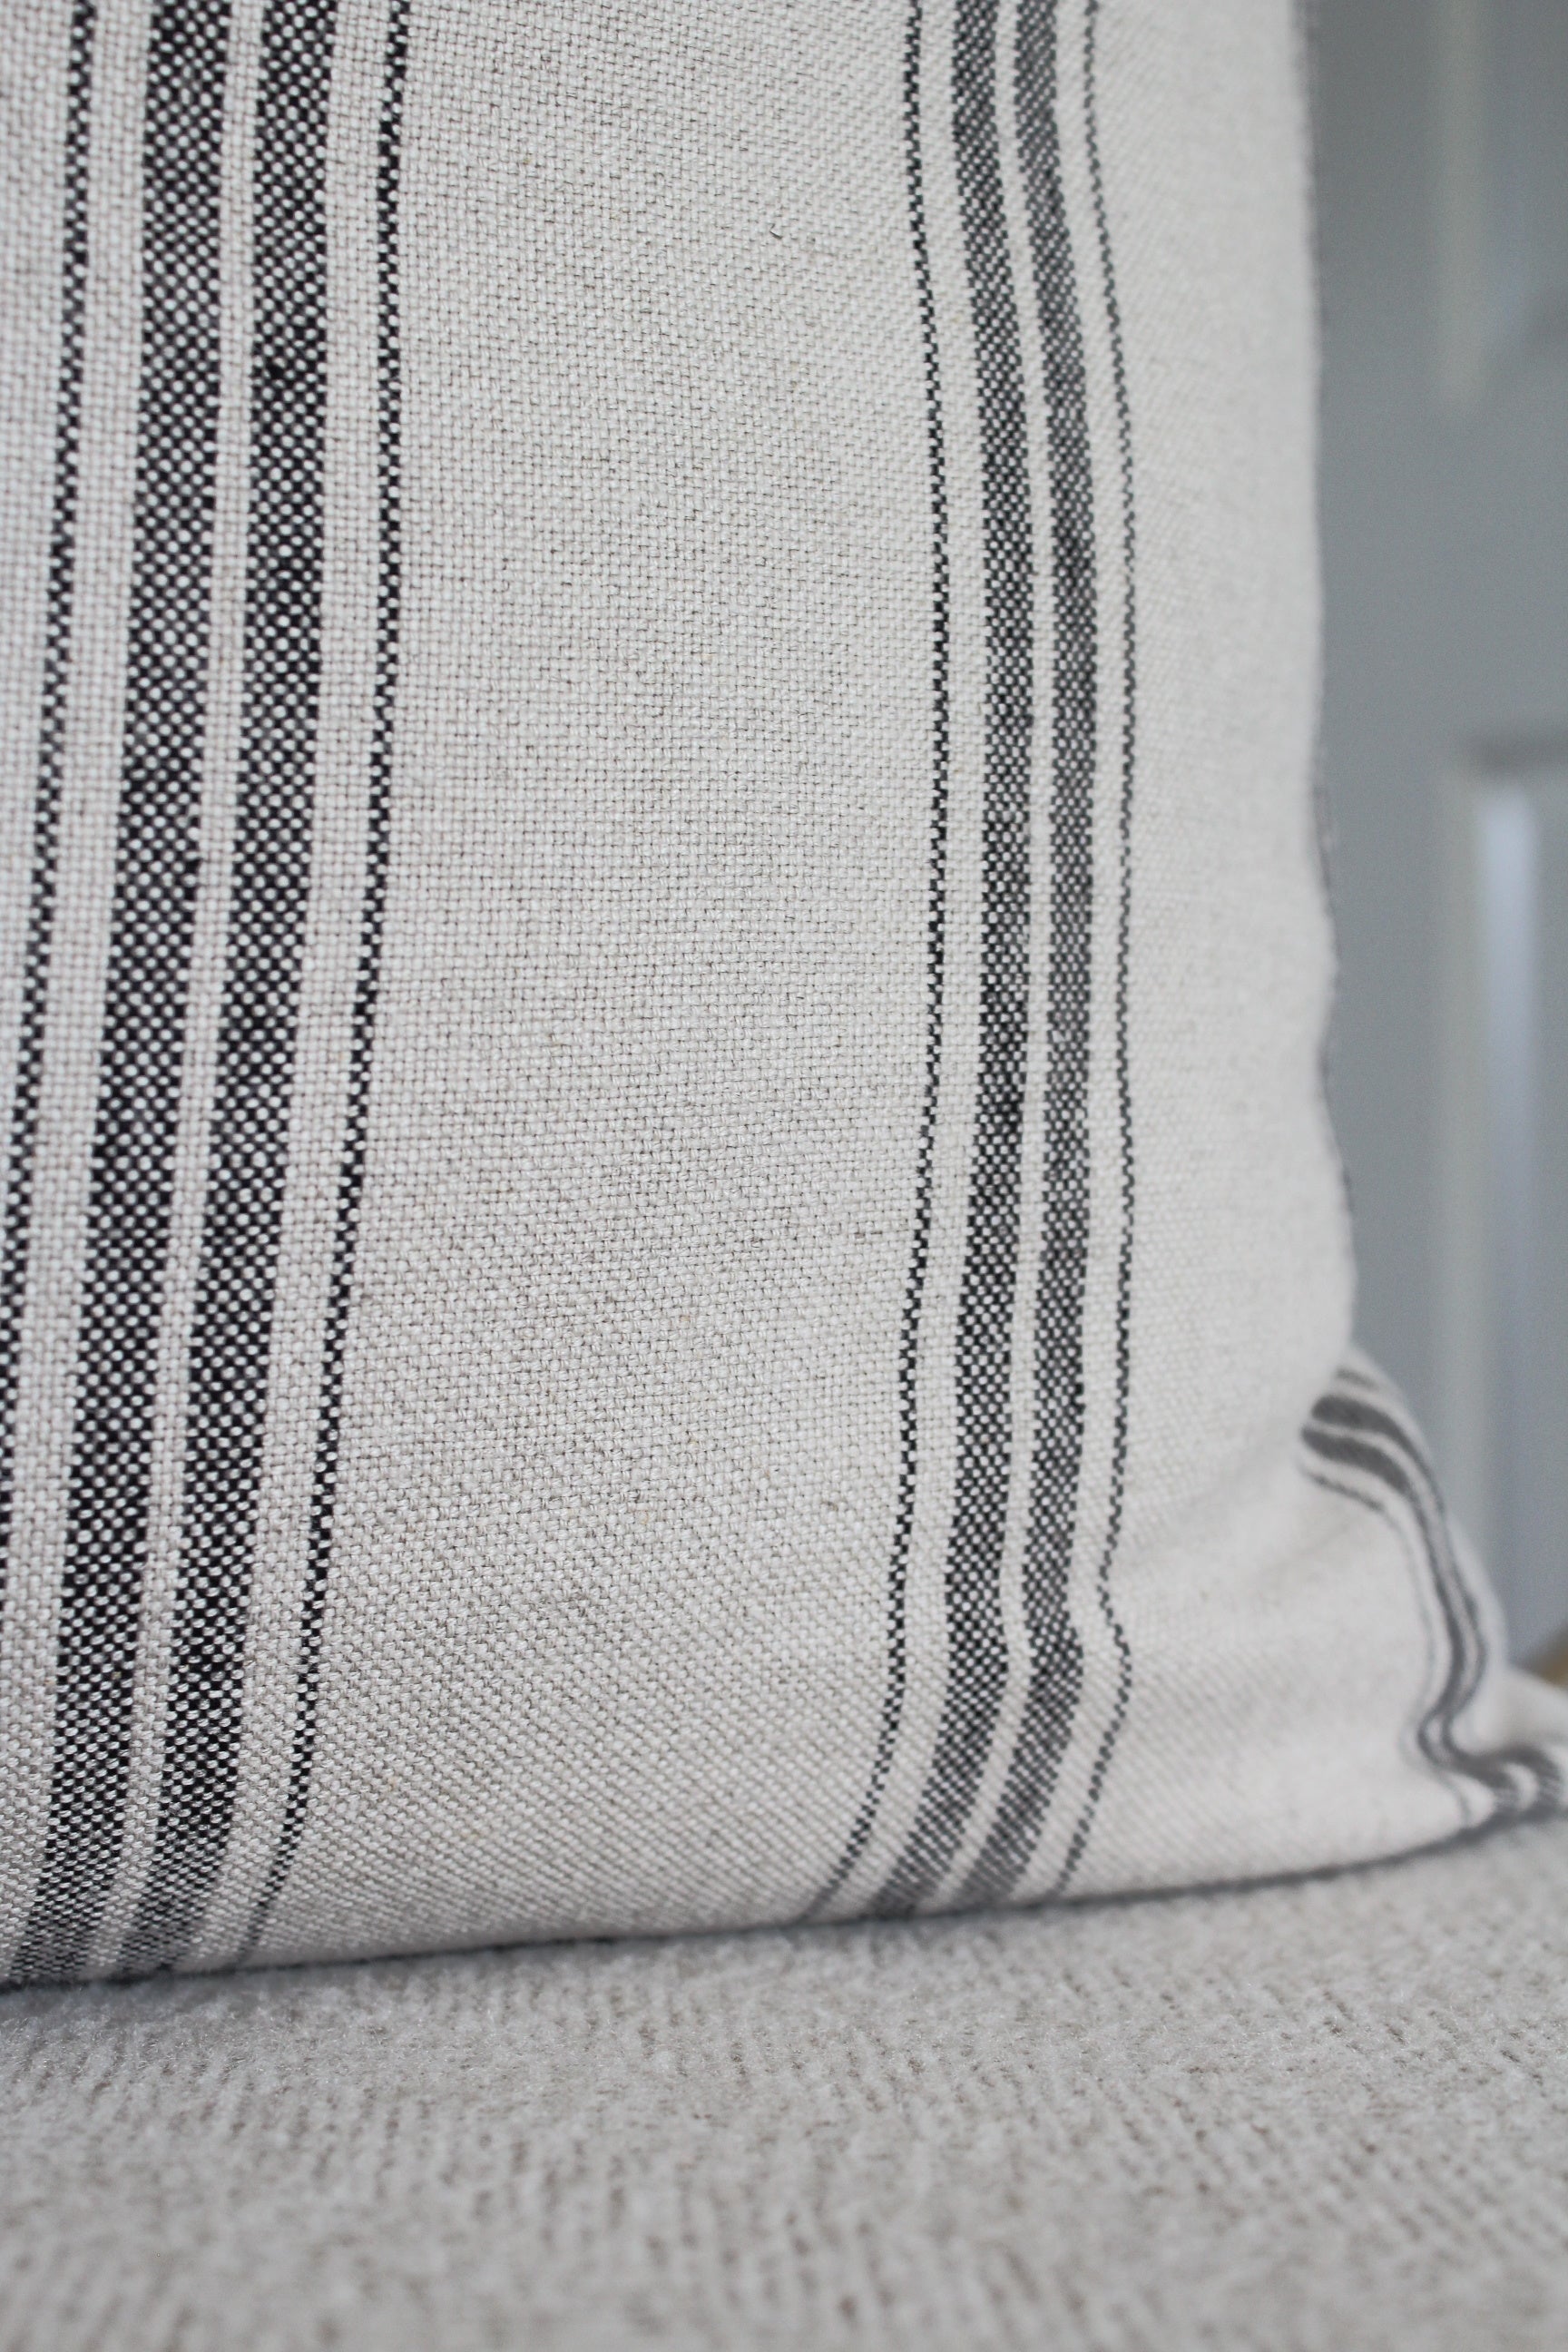 Graphite grey striped linen cushion cover with sand beige base